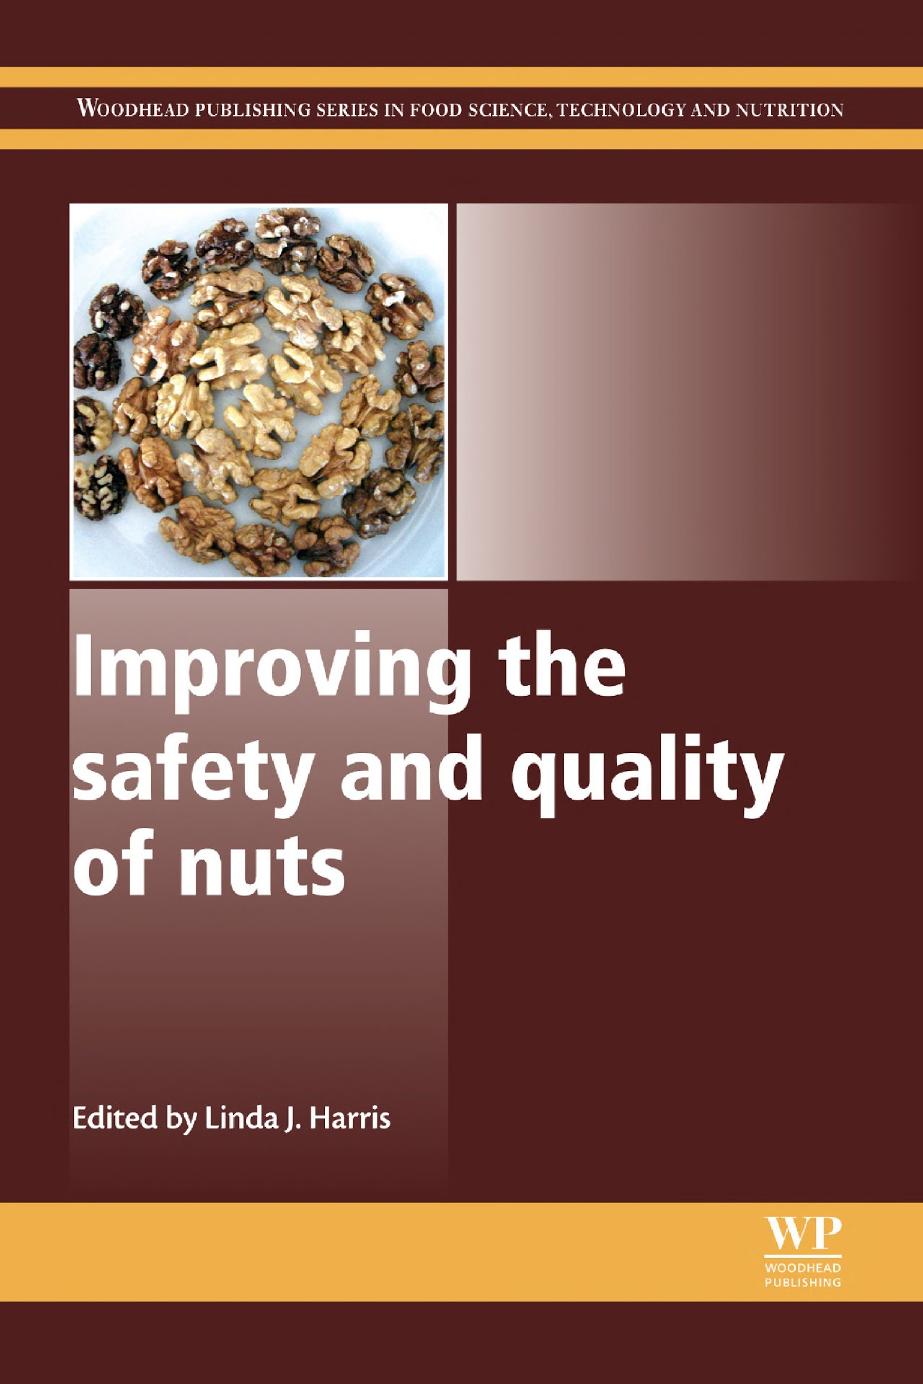 250. Improving the Safety and Quality of Nuts (2013) by Unknown